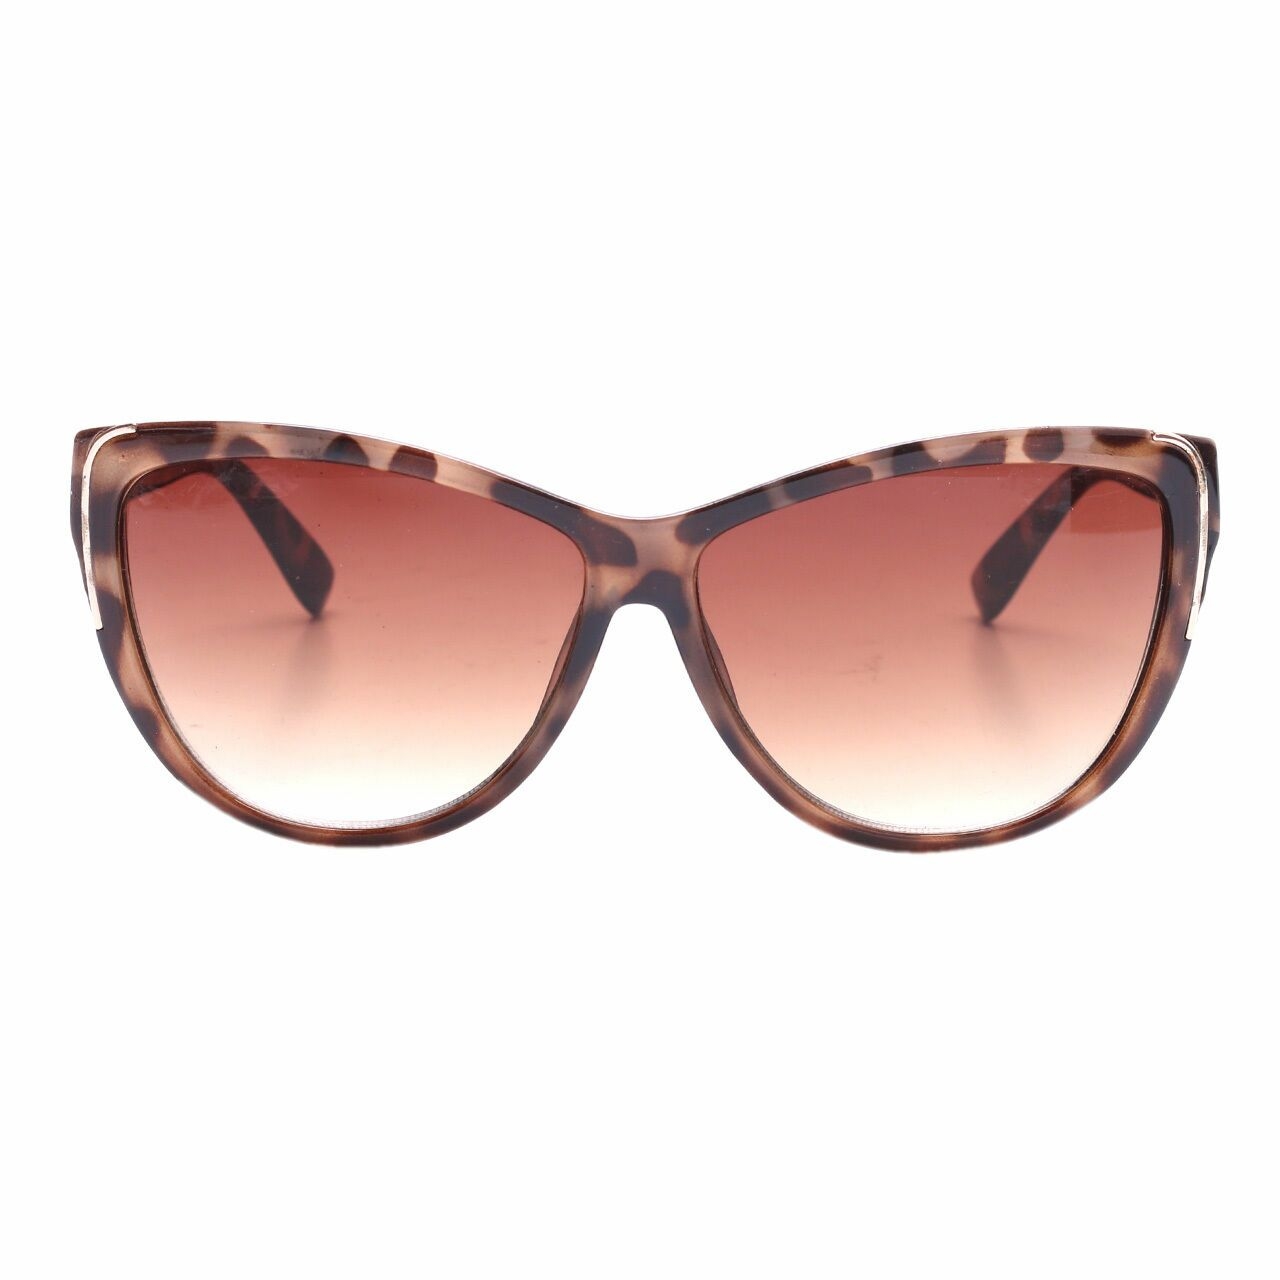 Kenneth Cole Brown Sunglasses